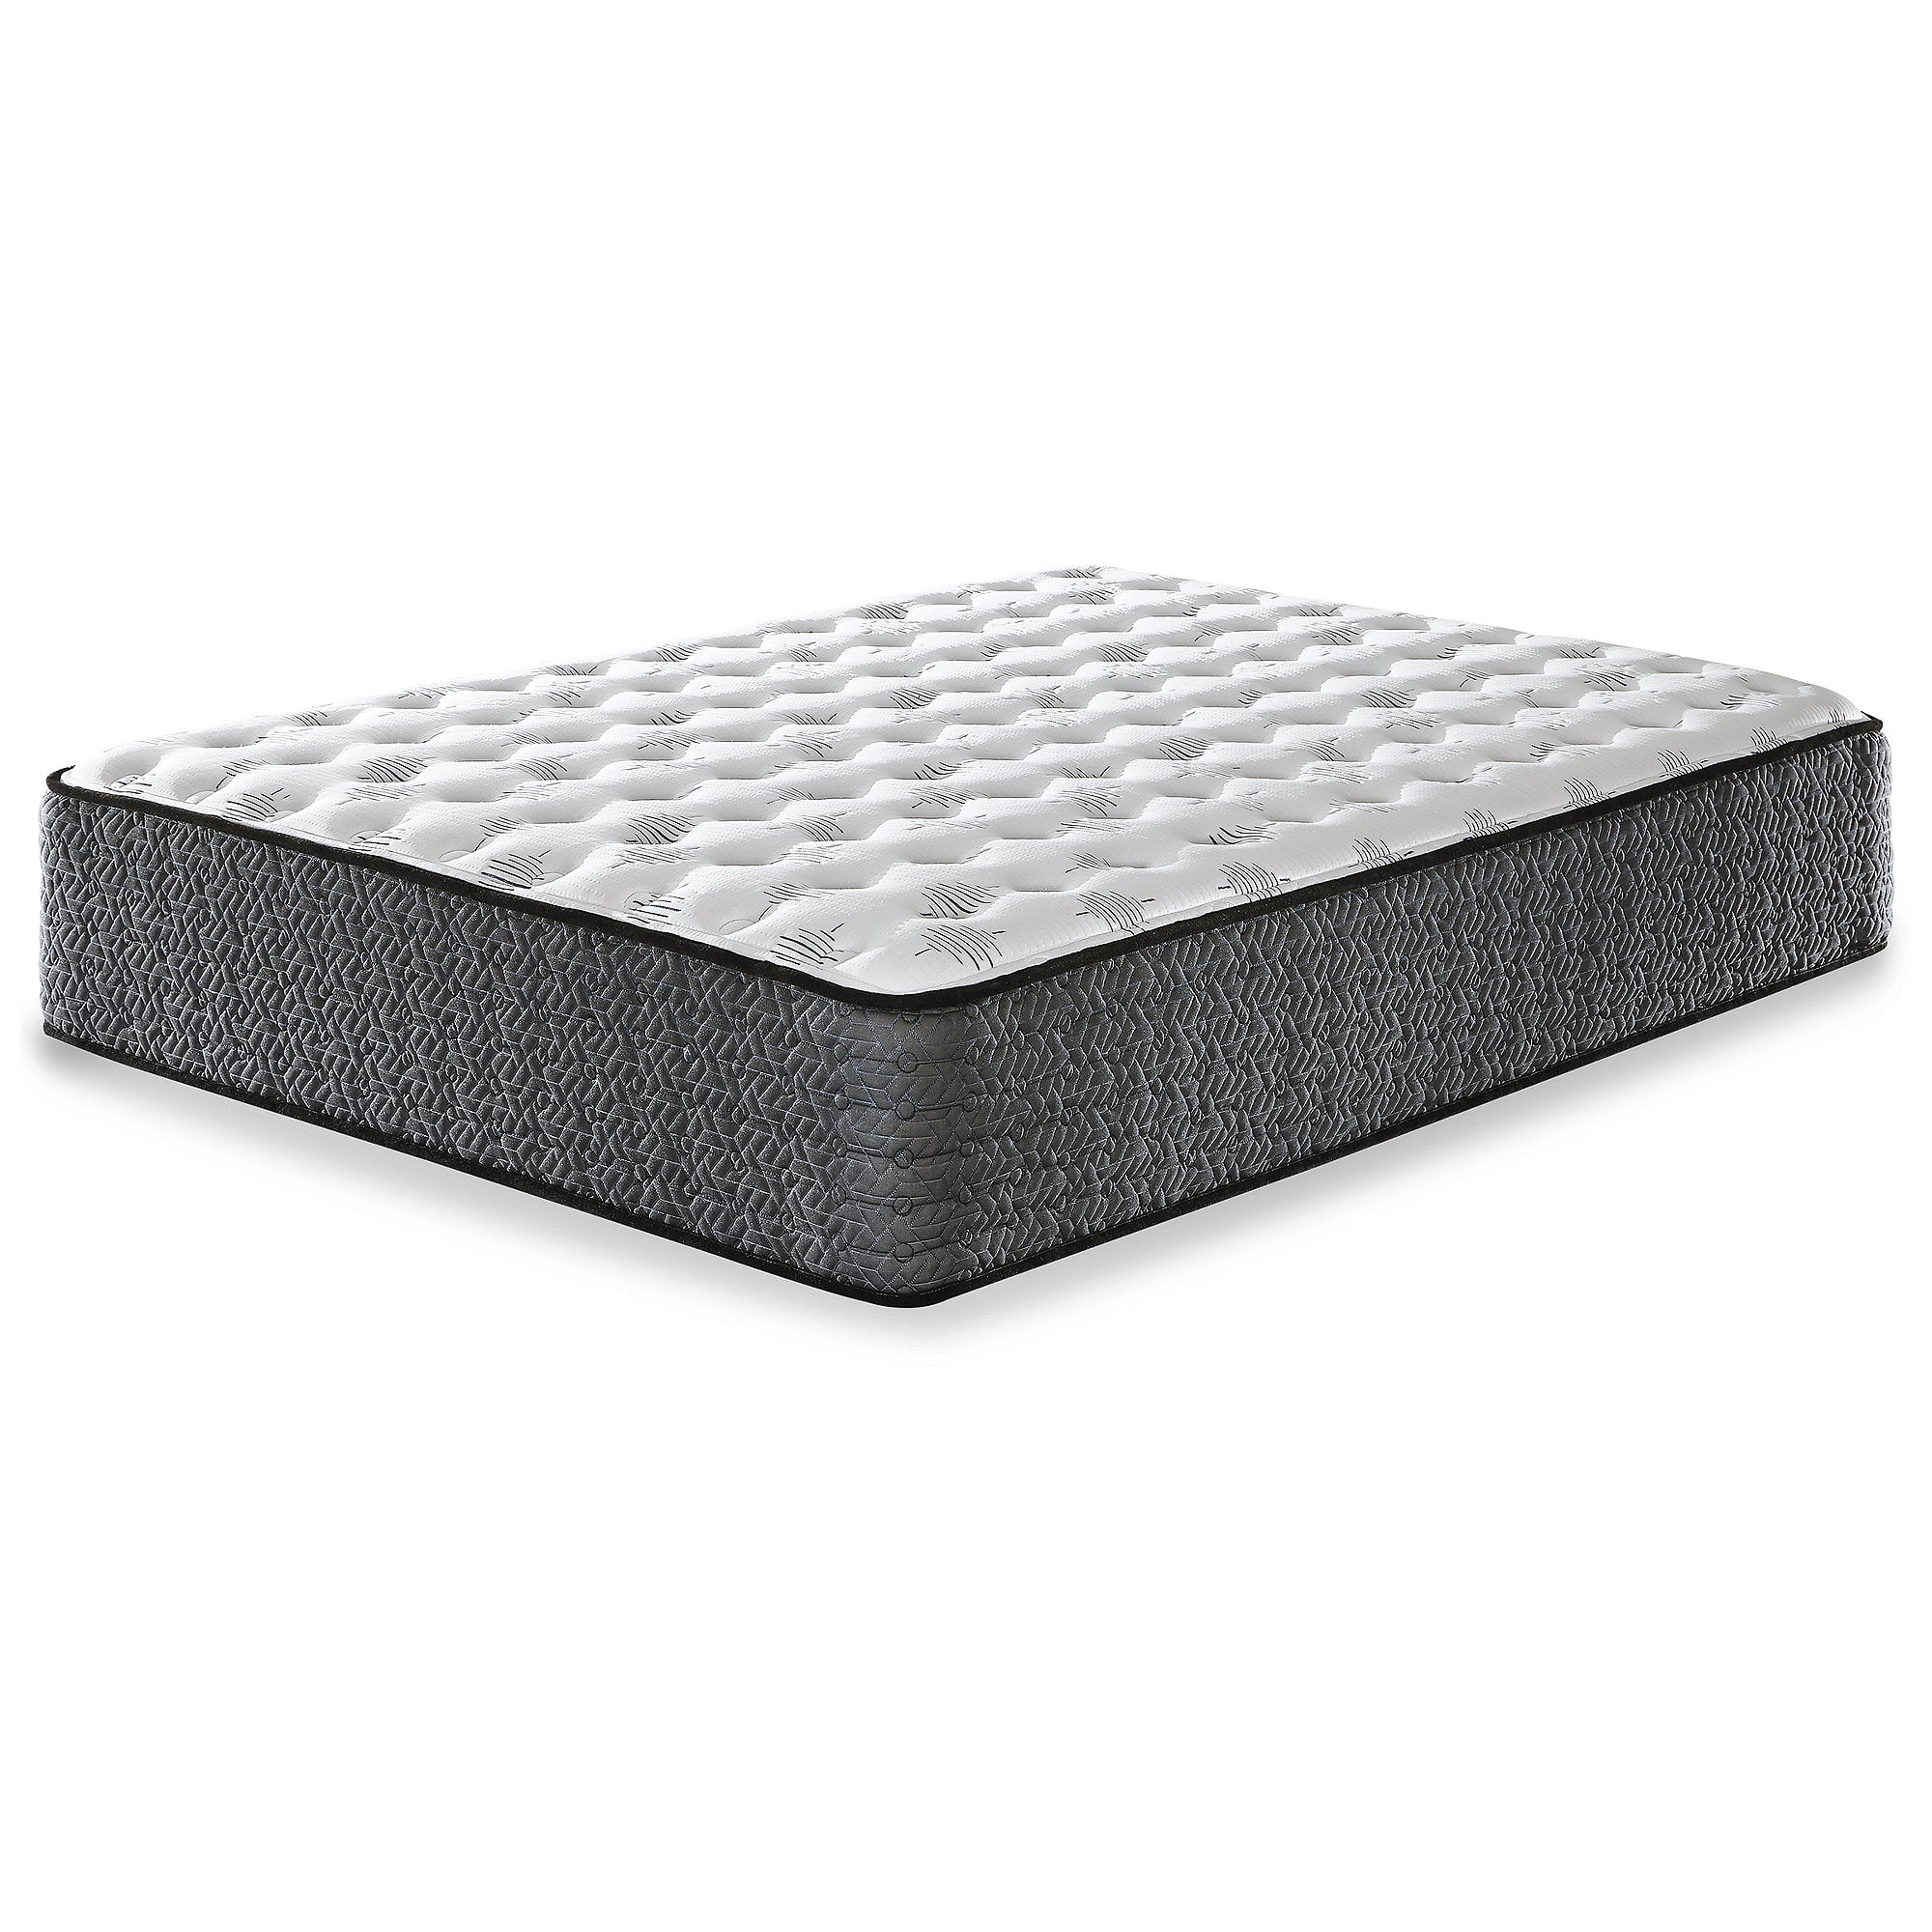 Signature Design by Ashley Ultra Luxury Firm Tight Top with Memory Foam Queen Mattress